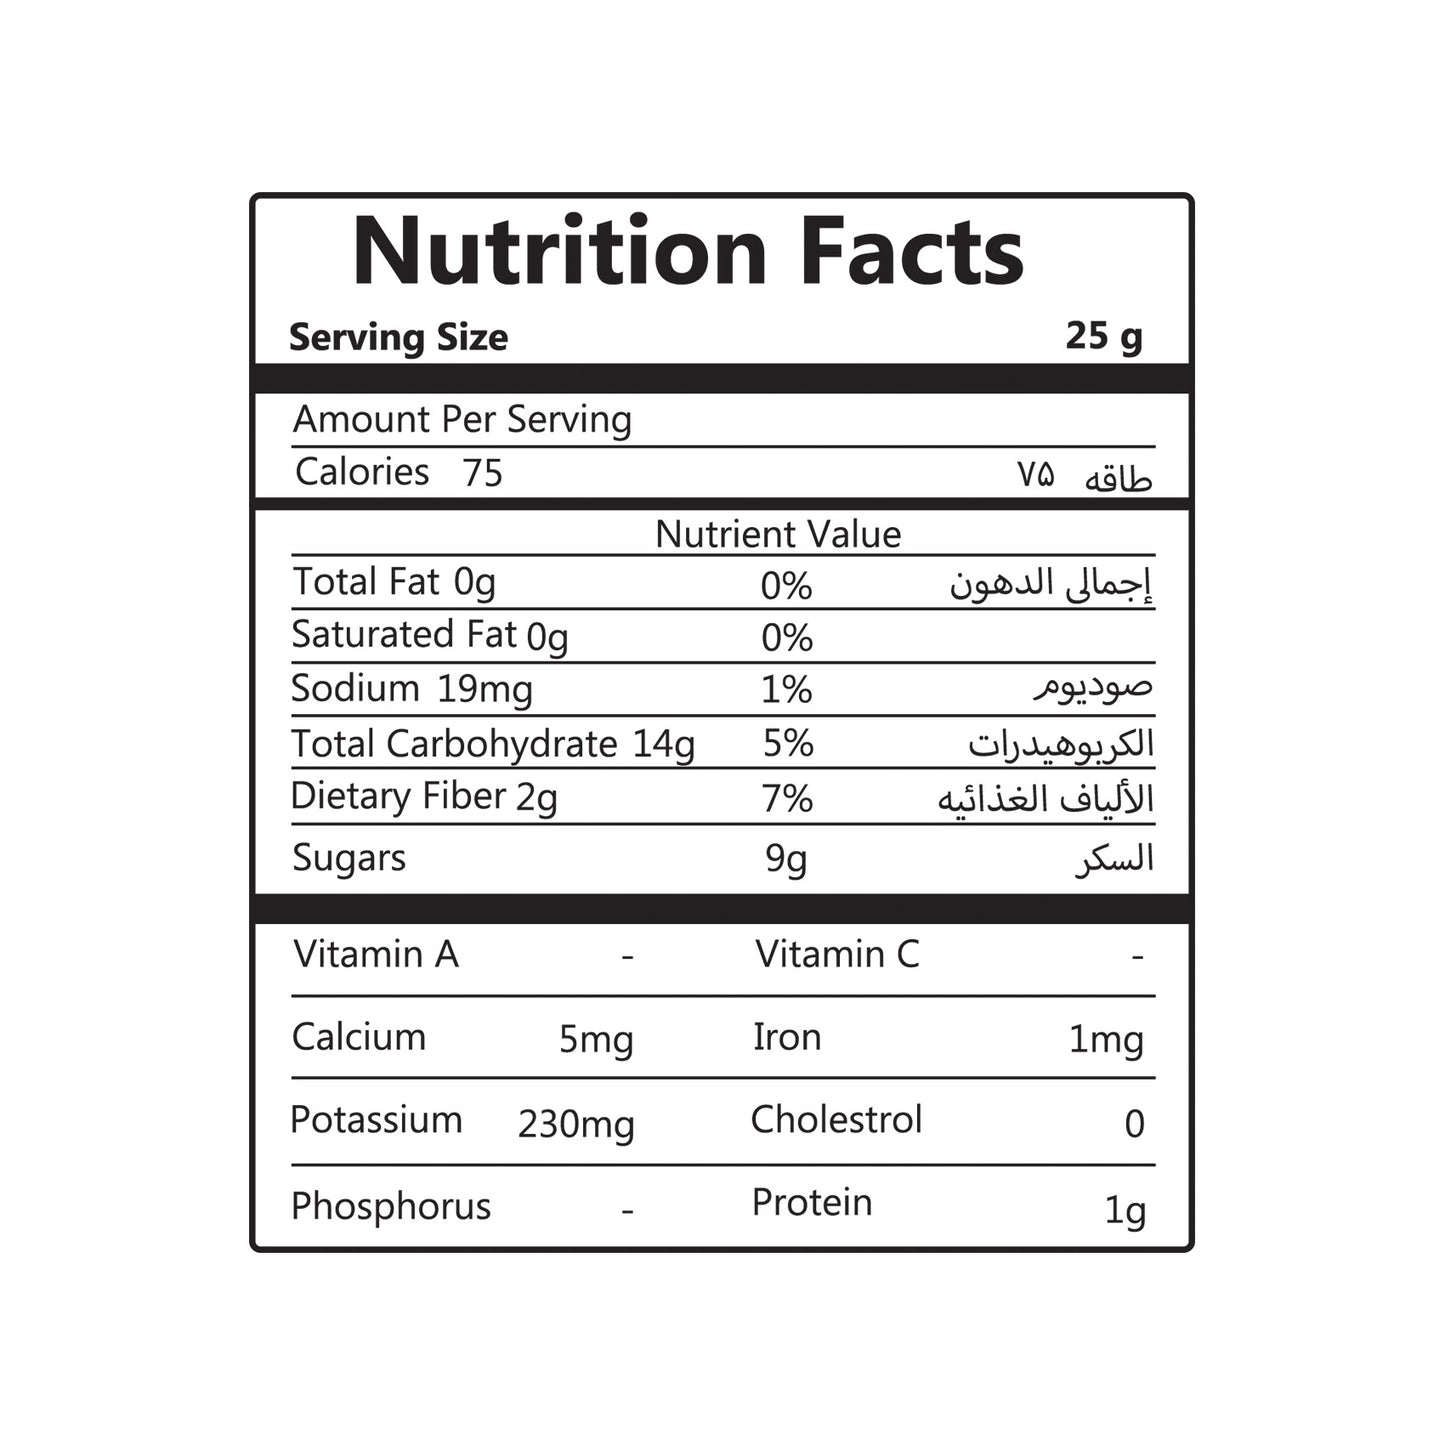 dried strawberry nutrition facts, dried strawberry calories 